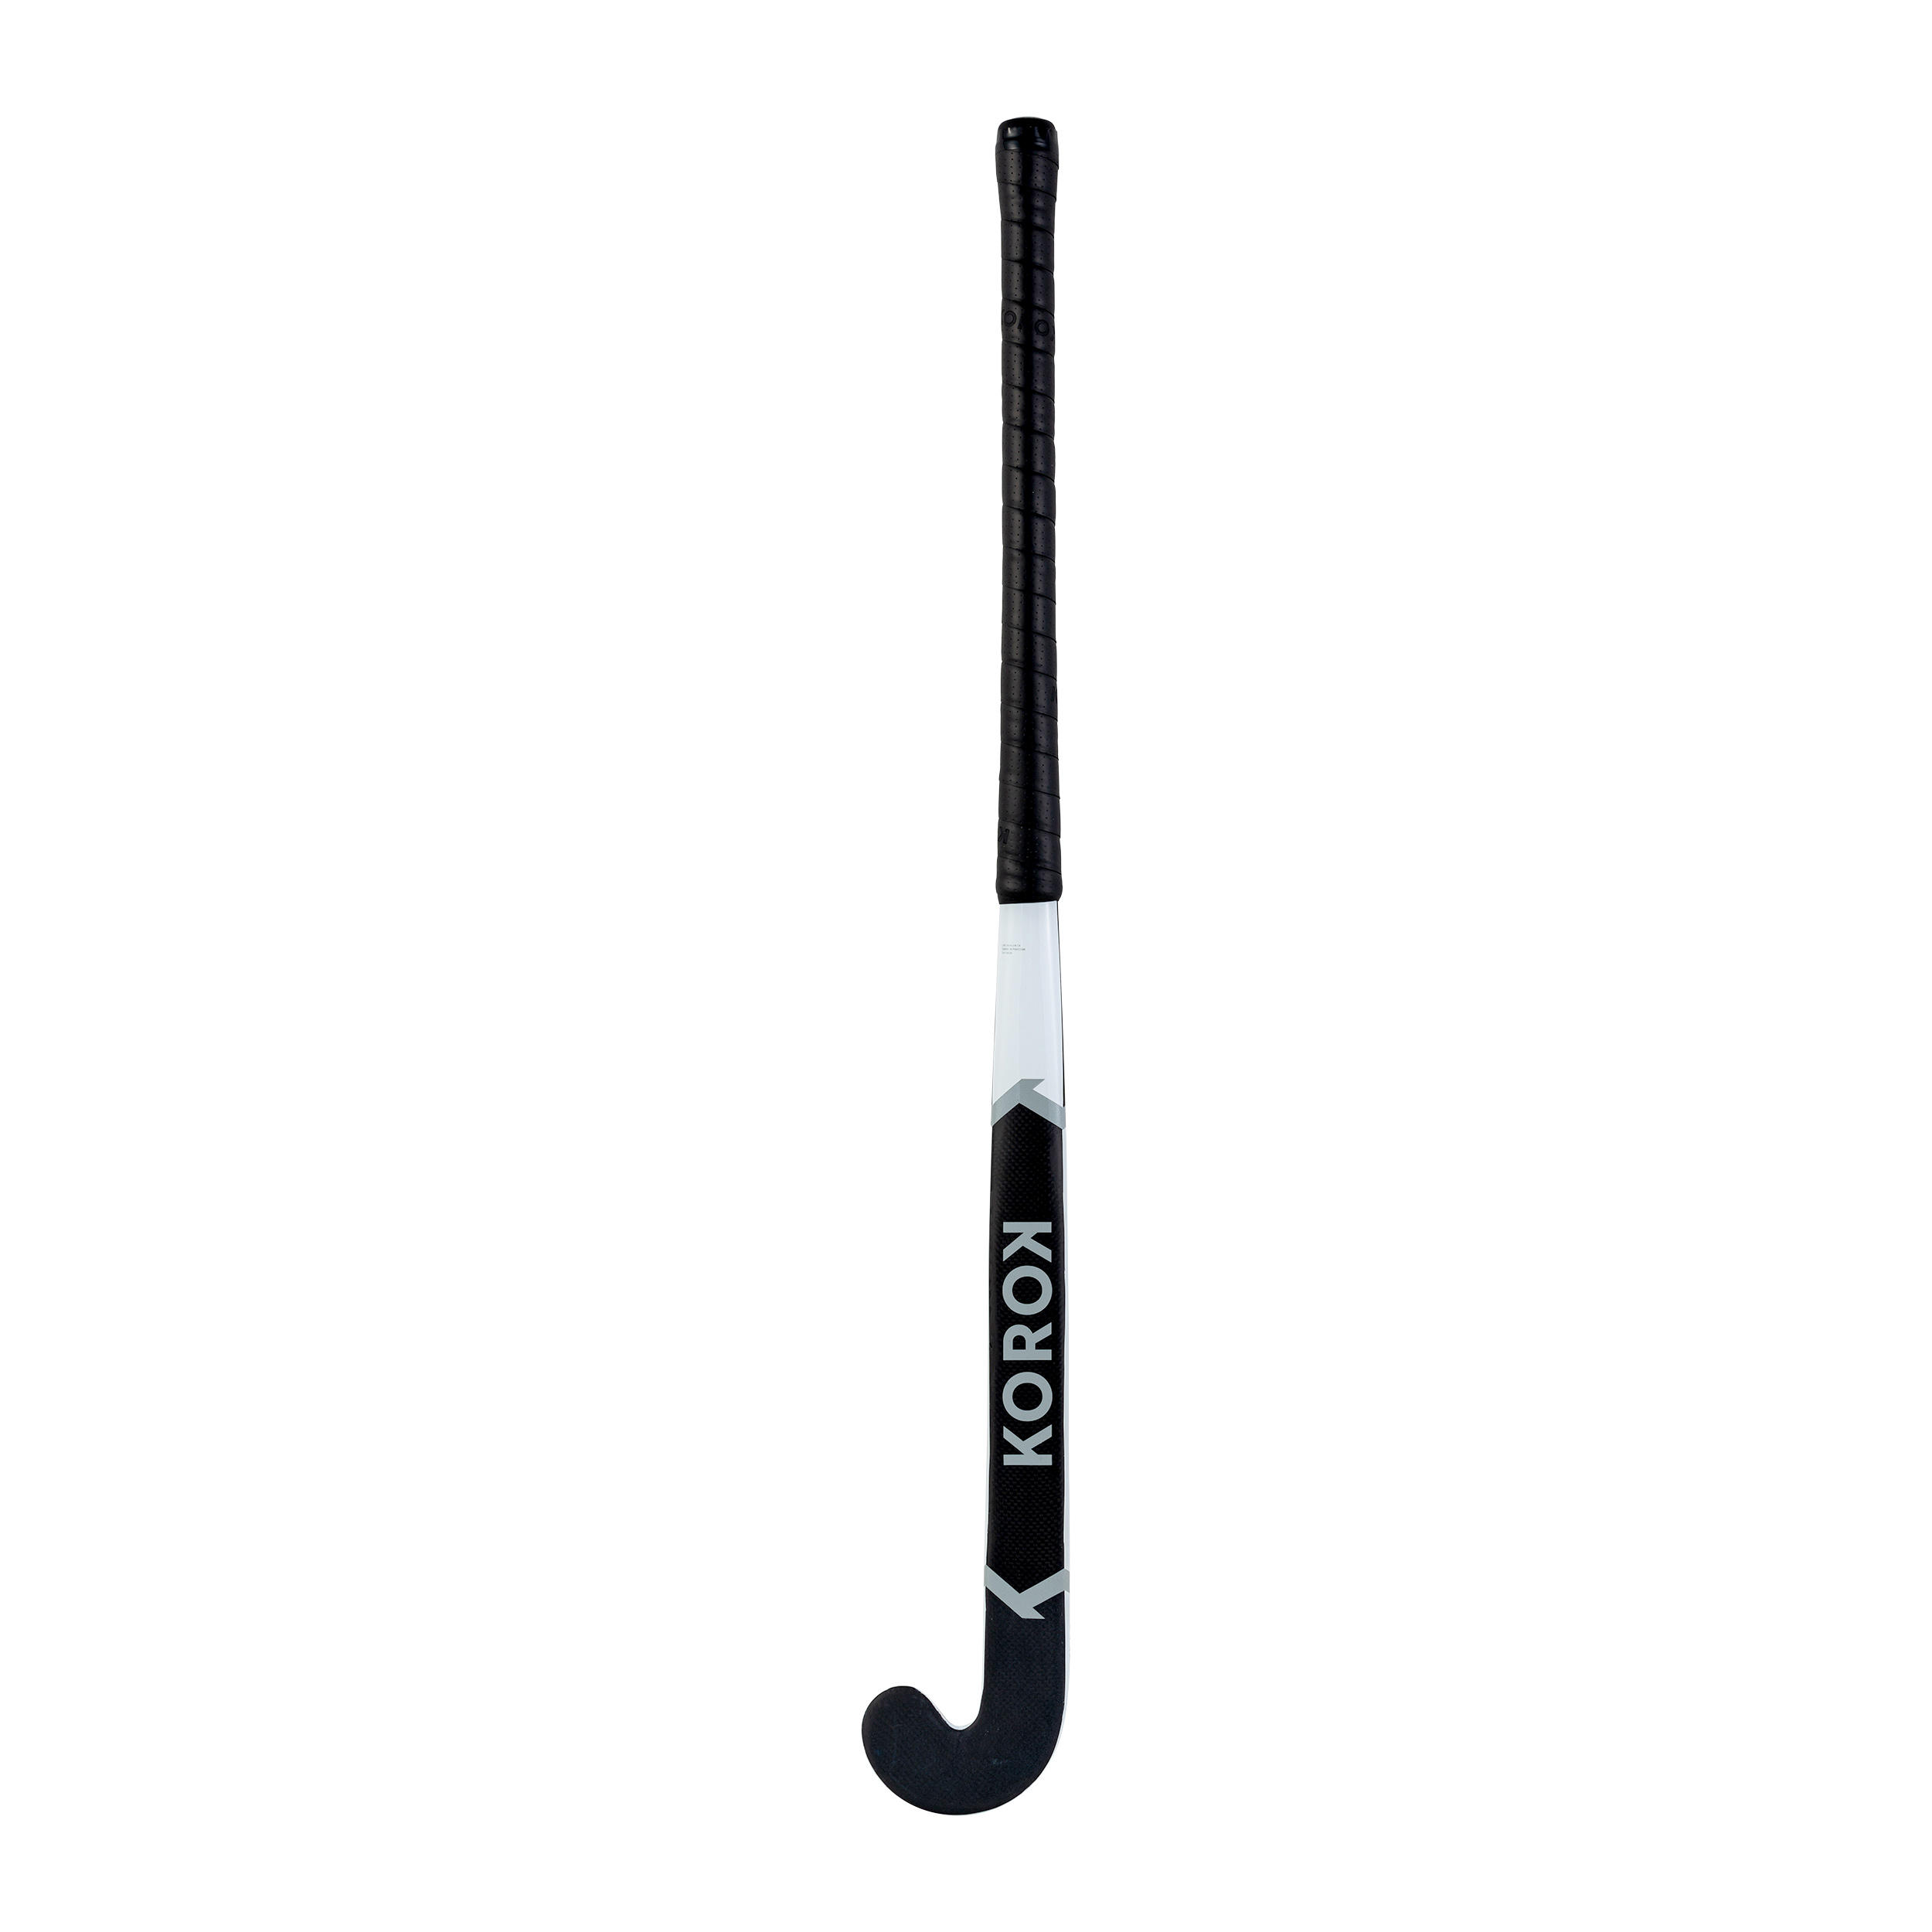 Adult Intermediate 60% Carbon Mid Bow Field Hockey Stick FH560 - White/Grey 5/12